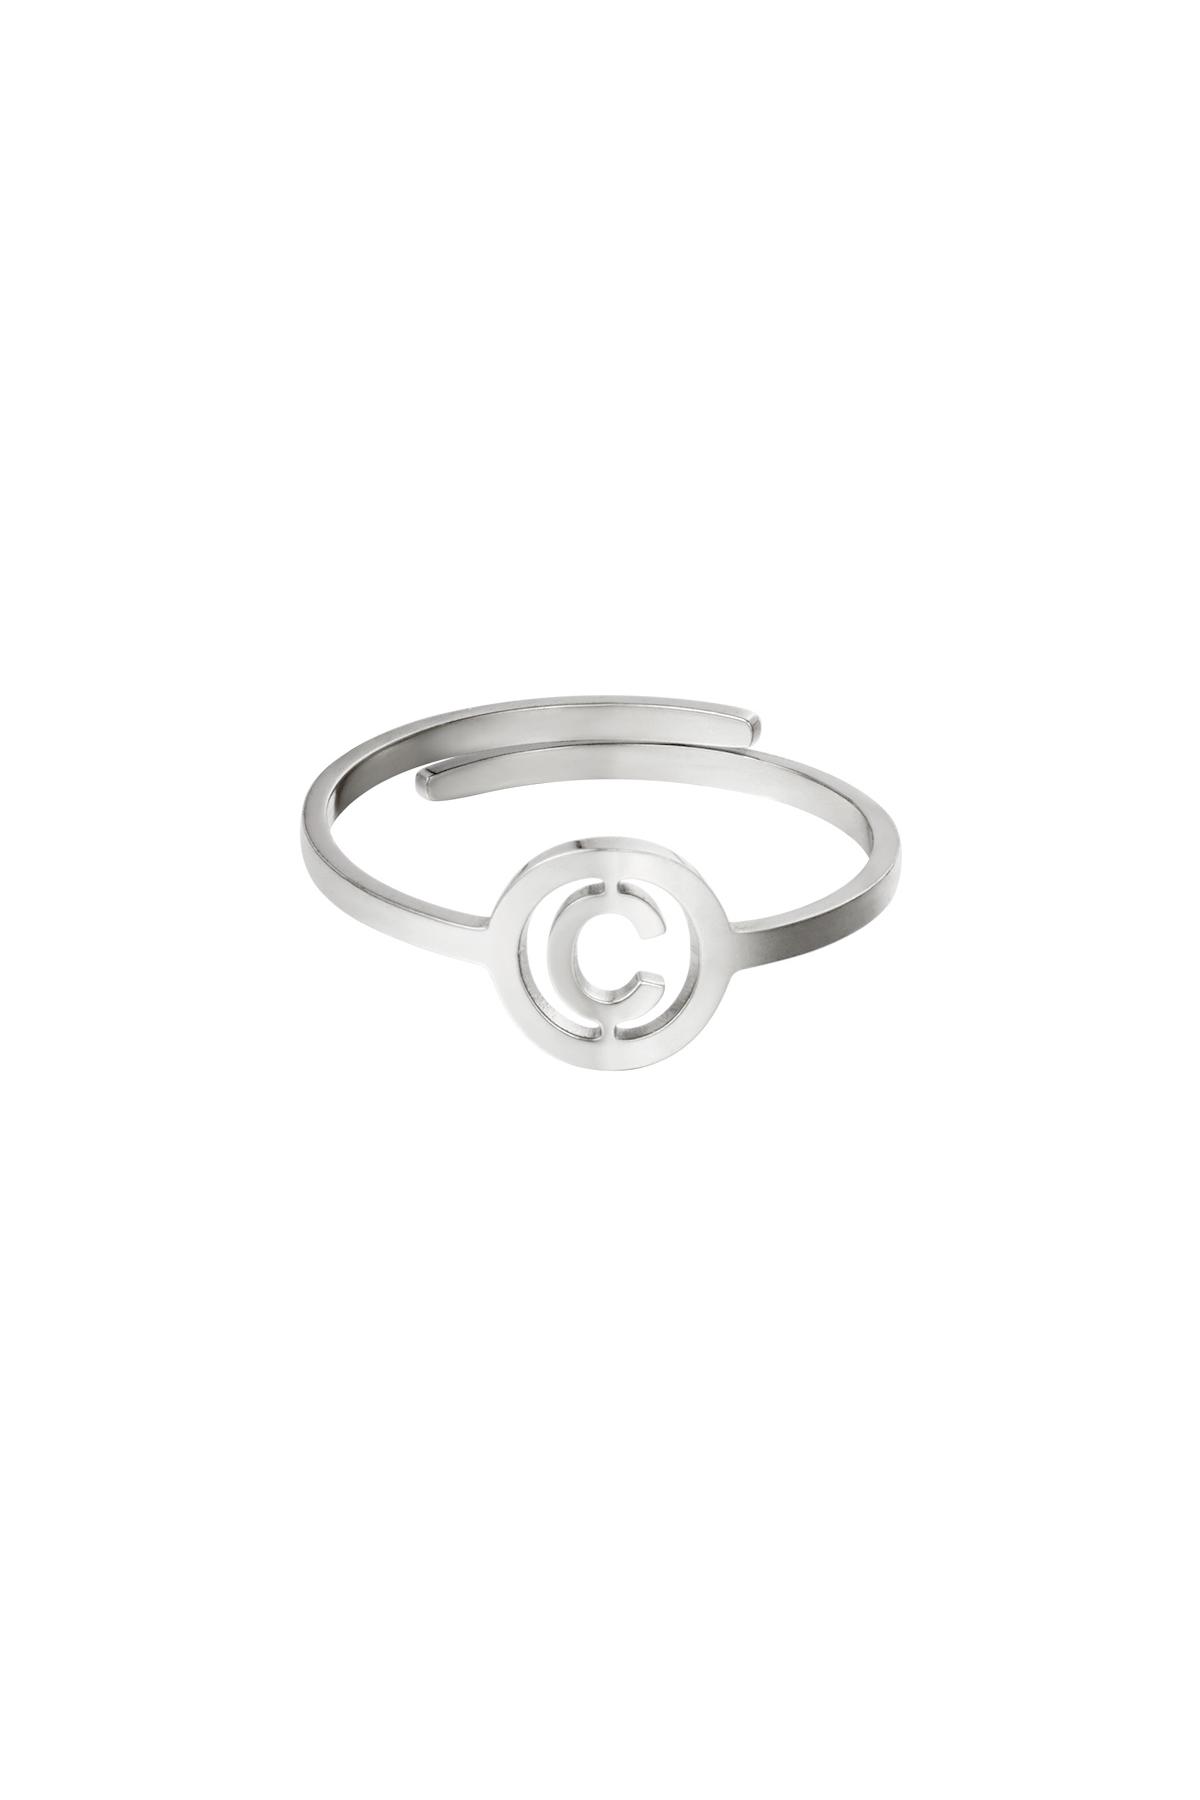 RVS ring initiaal C Zilver Stainless Steel